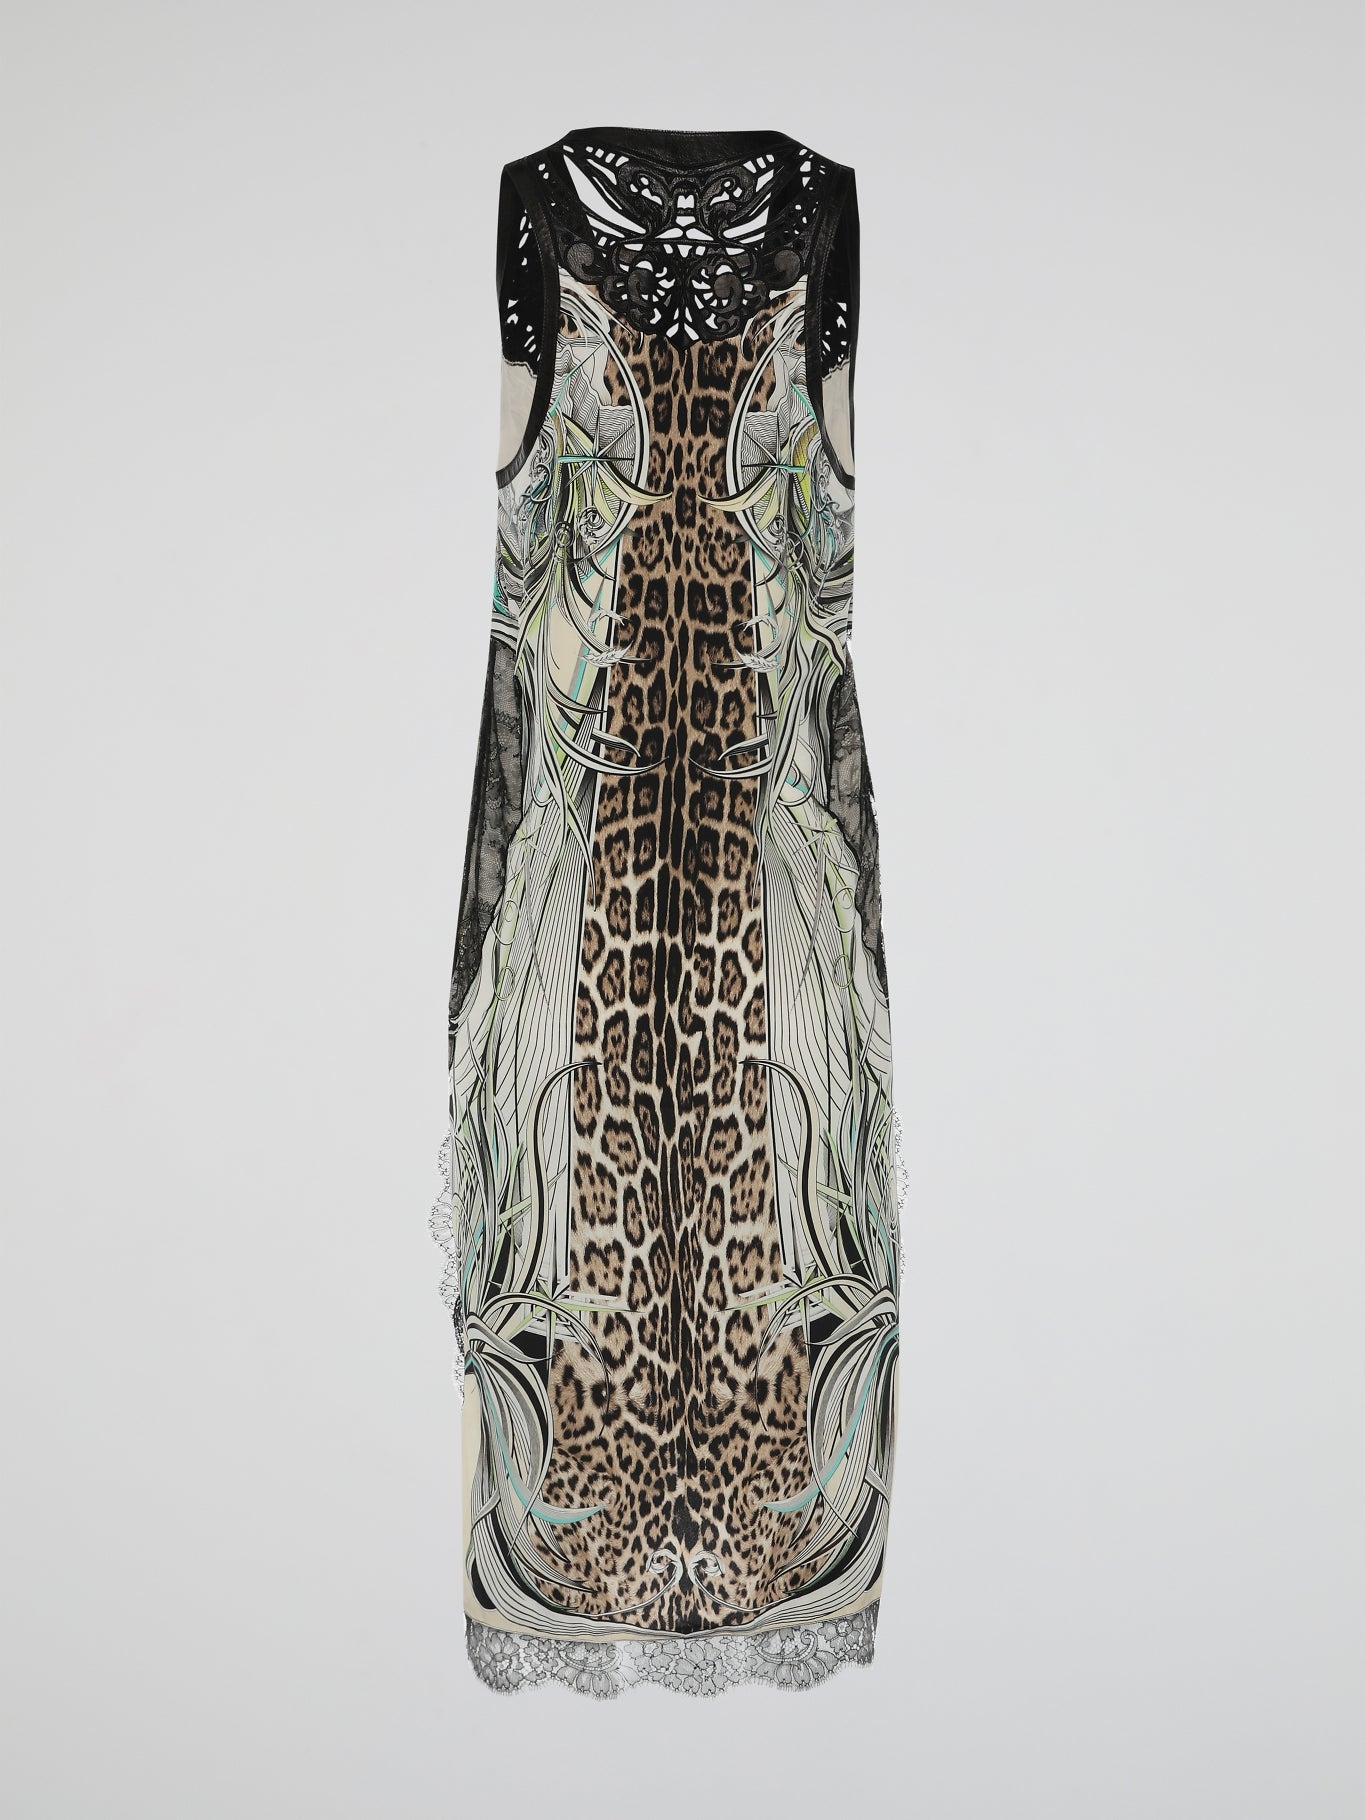 Step into the cradle of couture with our attention-grabbing Printed Sleeveless V-Neck Dress by Roberto Cavalli. Crafted with impeccable detail, this dress boasts a mesmerizing blend of vibrant colors and extravagant patterns that effortlessly command the spotlight. Embrace your inner fashionista and let this daring ensemble take you from elegant evenings to unforgettable adventures.